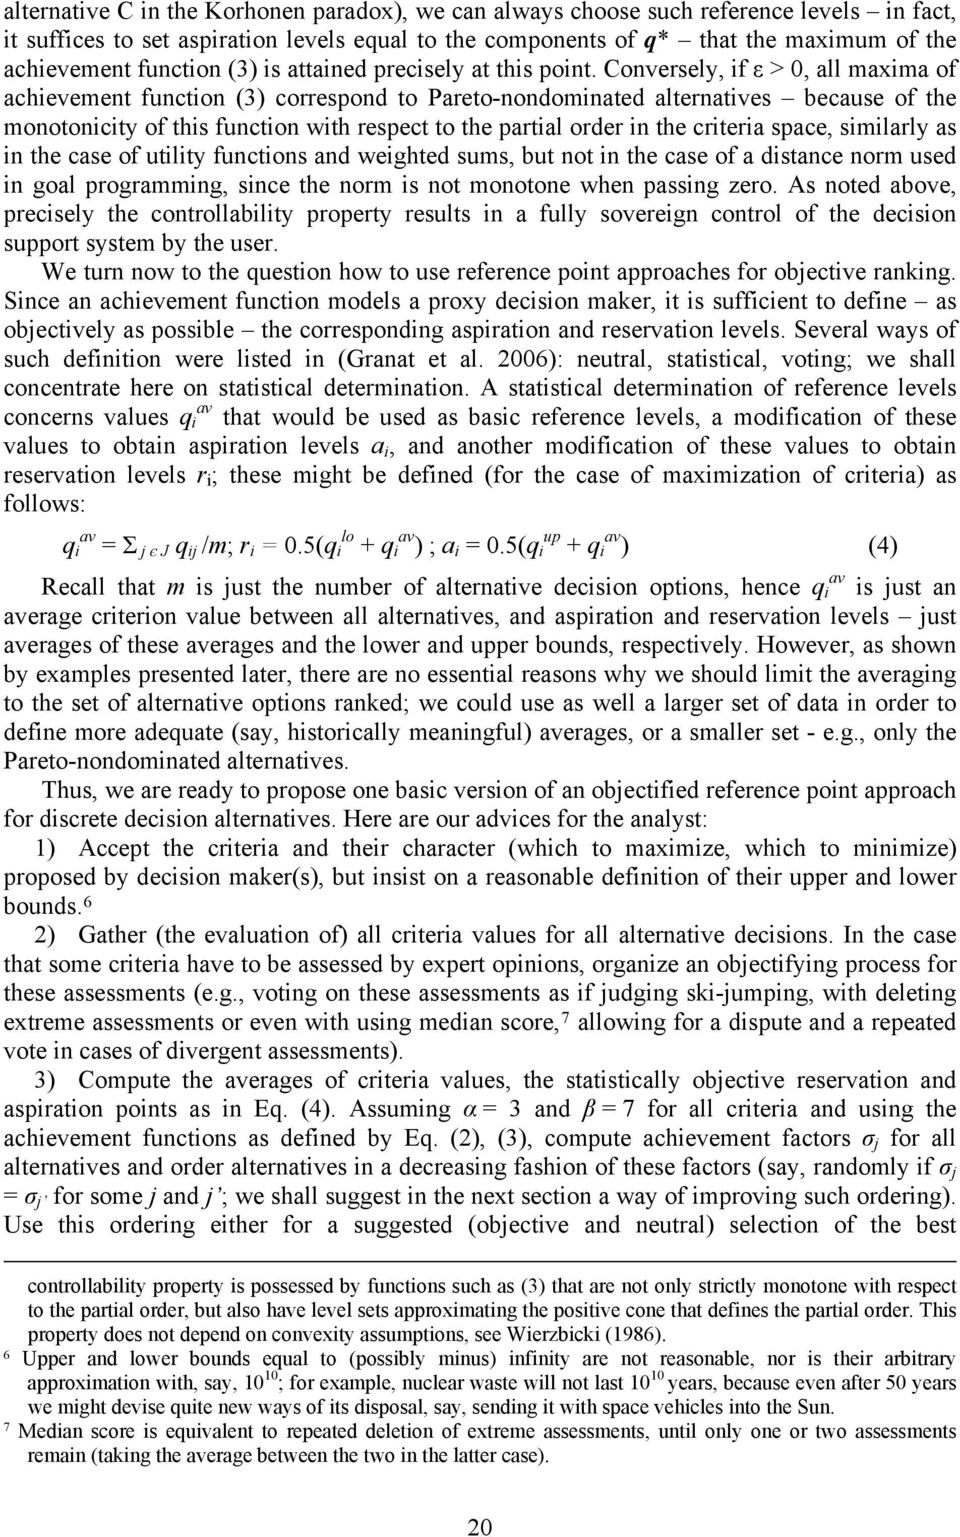 Conversely, if ε > 0, all maxima of achievement function (3) correspond to Pareto-nondominated alternatives because of the monotonicity of this function with respect to the partial order in the